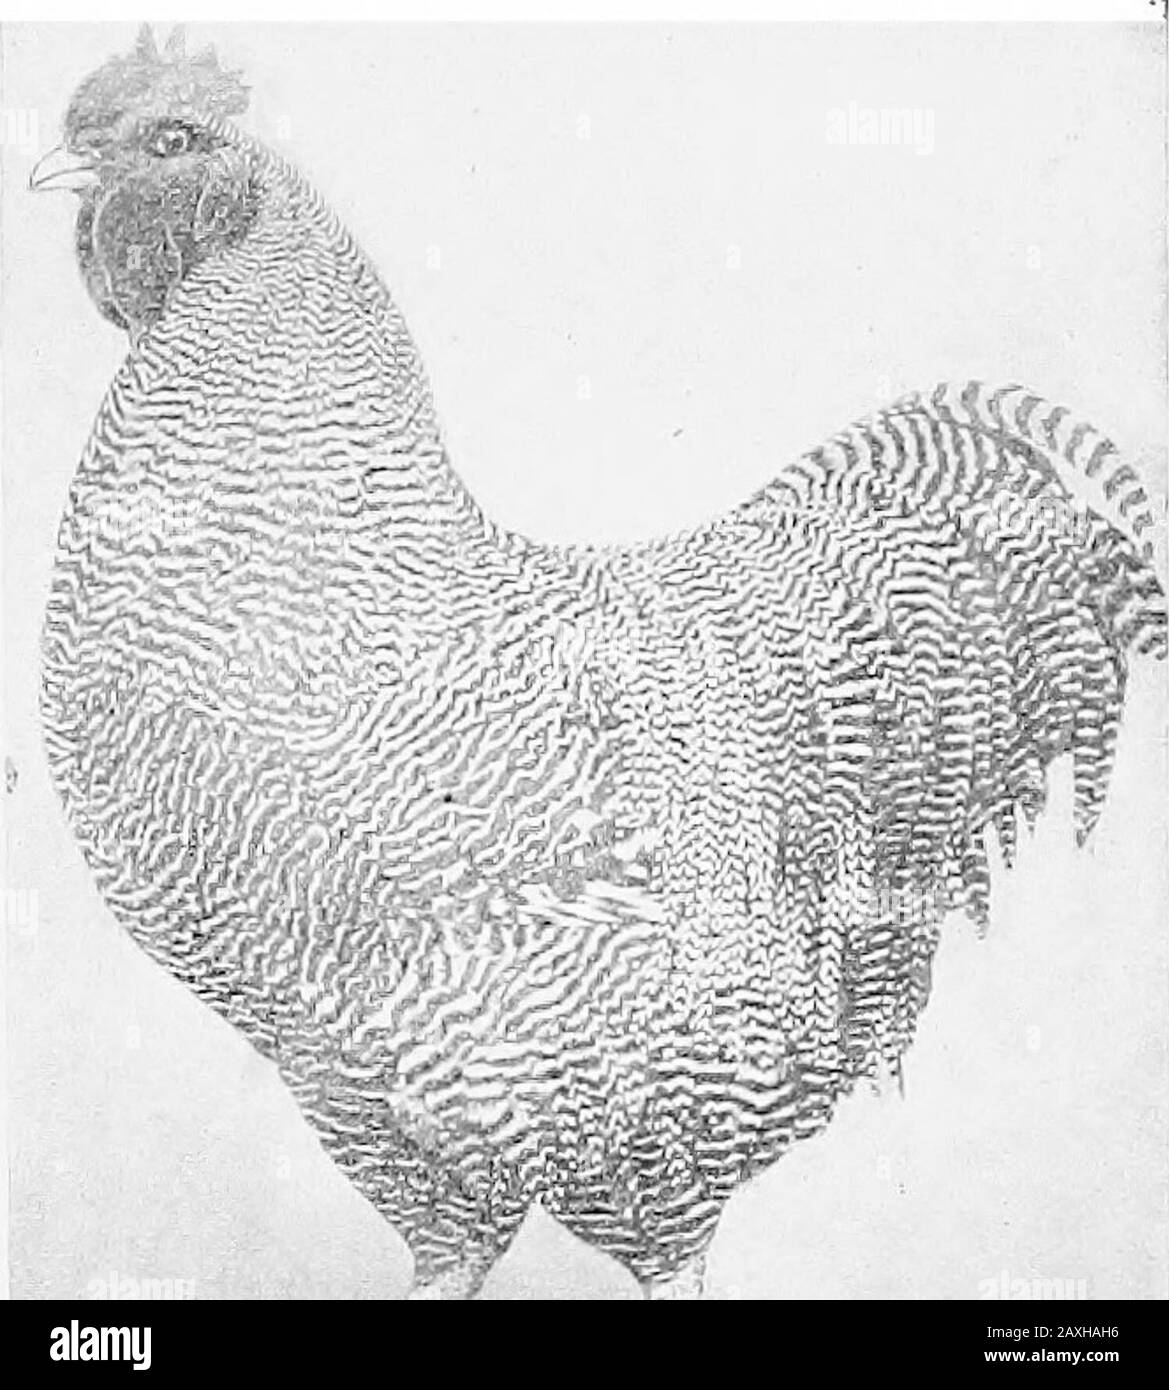 Poultry culture sanitation and hygiene . Fig. 6.—Barred Plymouth Rock hen. A representative of the Americanclass and good utility stock. One of the best breeds for the farm. goodly amount of meat, and are good egg producers. Theyare rather quiet in disposition and are adapted to the farm. The American breeds have then origin in America. The Plymouth Rocks.—There are six standard varieties—•namely: Barred, White, Buff, Partridge, Silver Penciled, andColumbian. The Barred Plymouth Rock is the most popular fowl inAmerica and had its origin in the New England States. 46 POULTRY CULTURE The first p Stock Photo